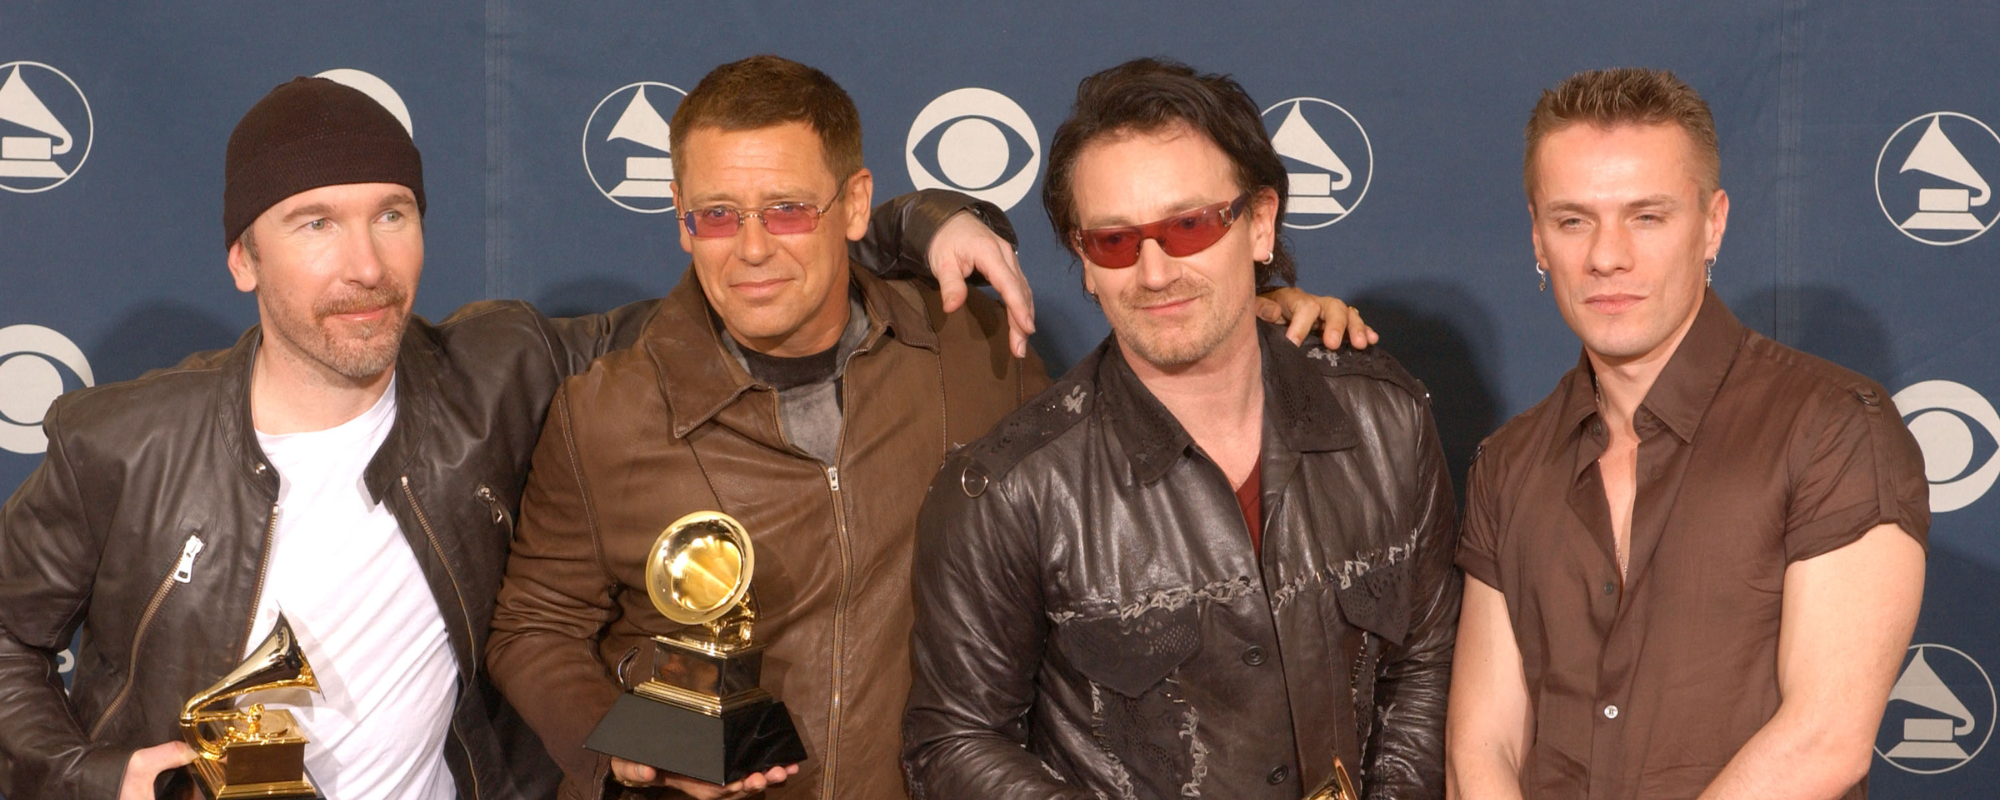 Pro ‘Pop’: The Case for U2’s Most Maligned Album